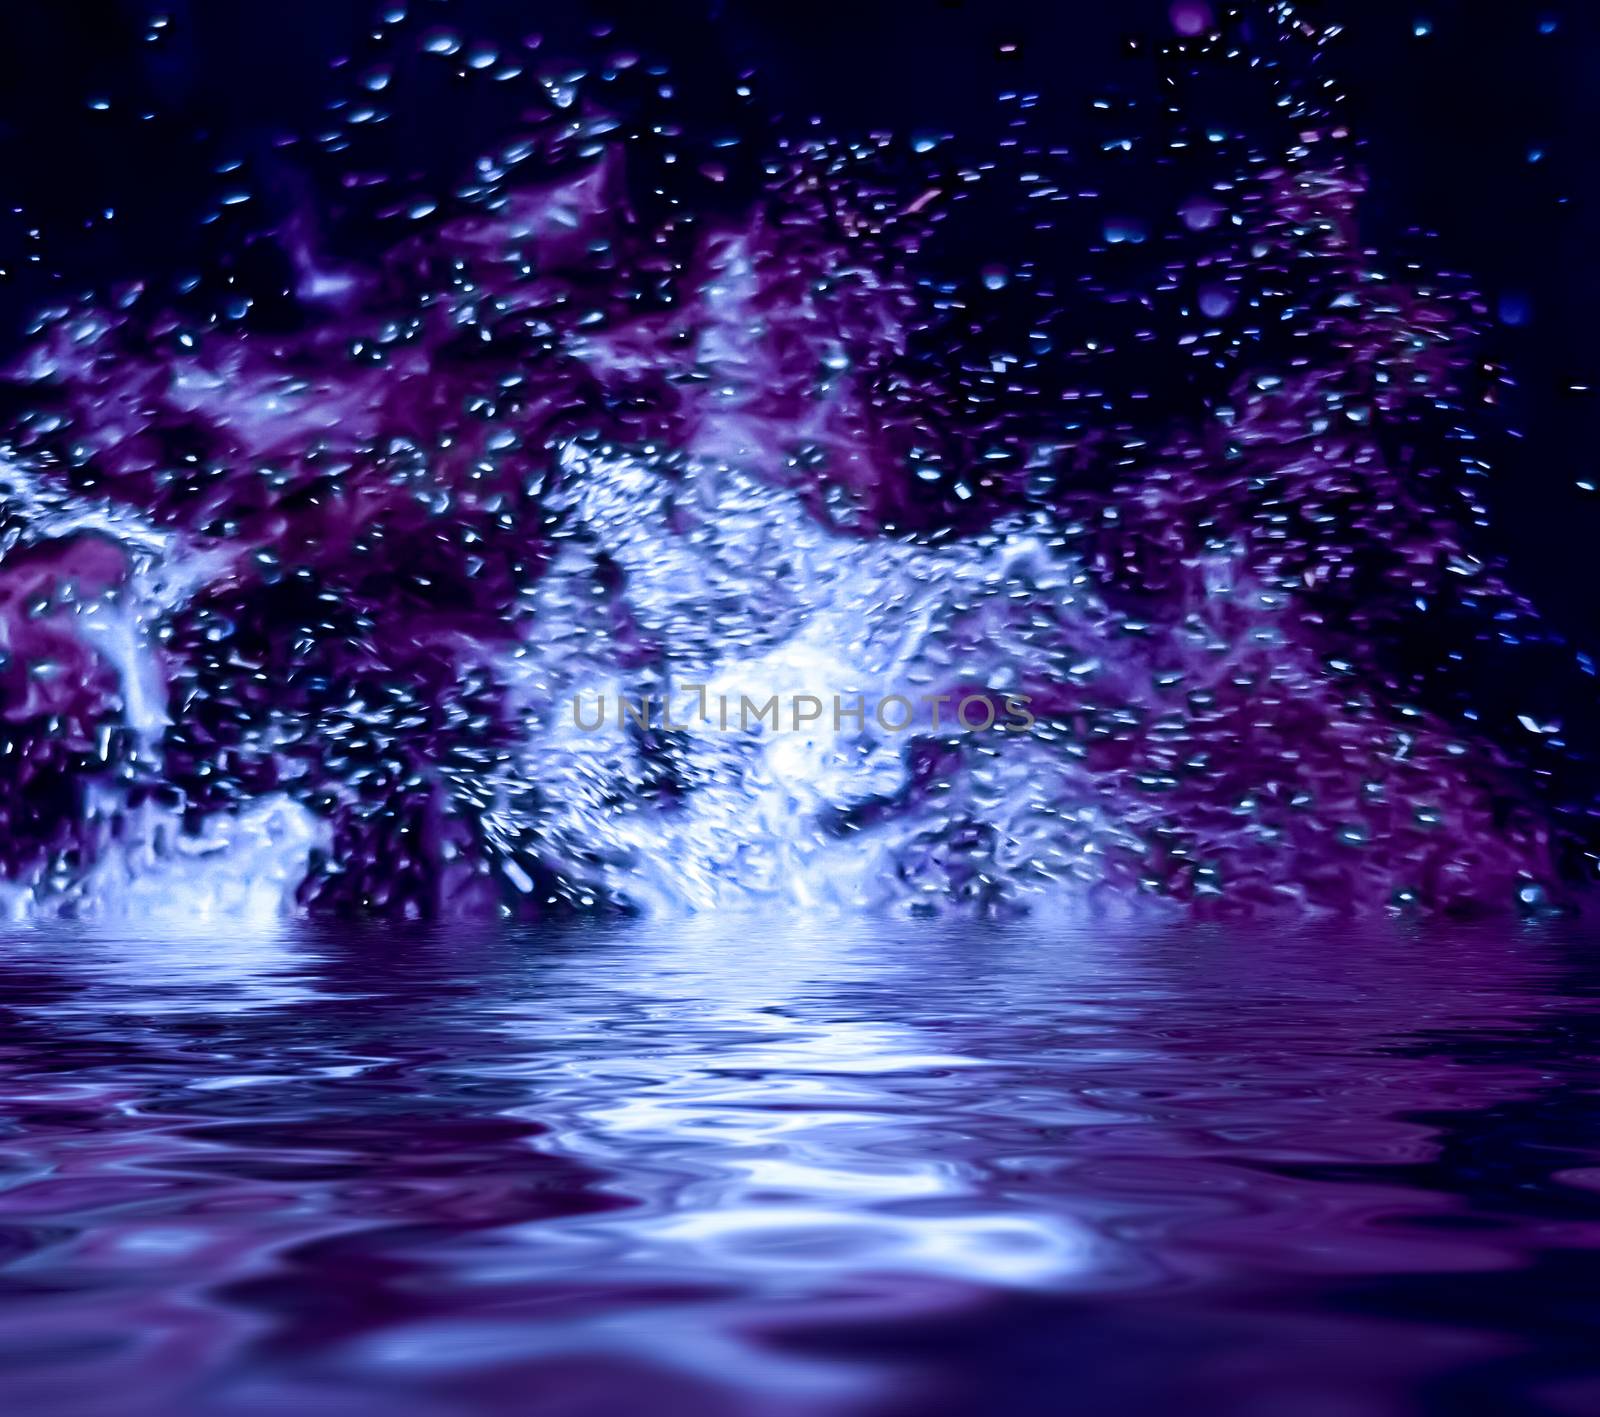 Abstract purple smoke in water as minimal background, magical backdrop and flow design